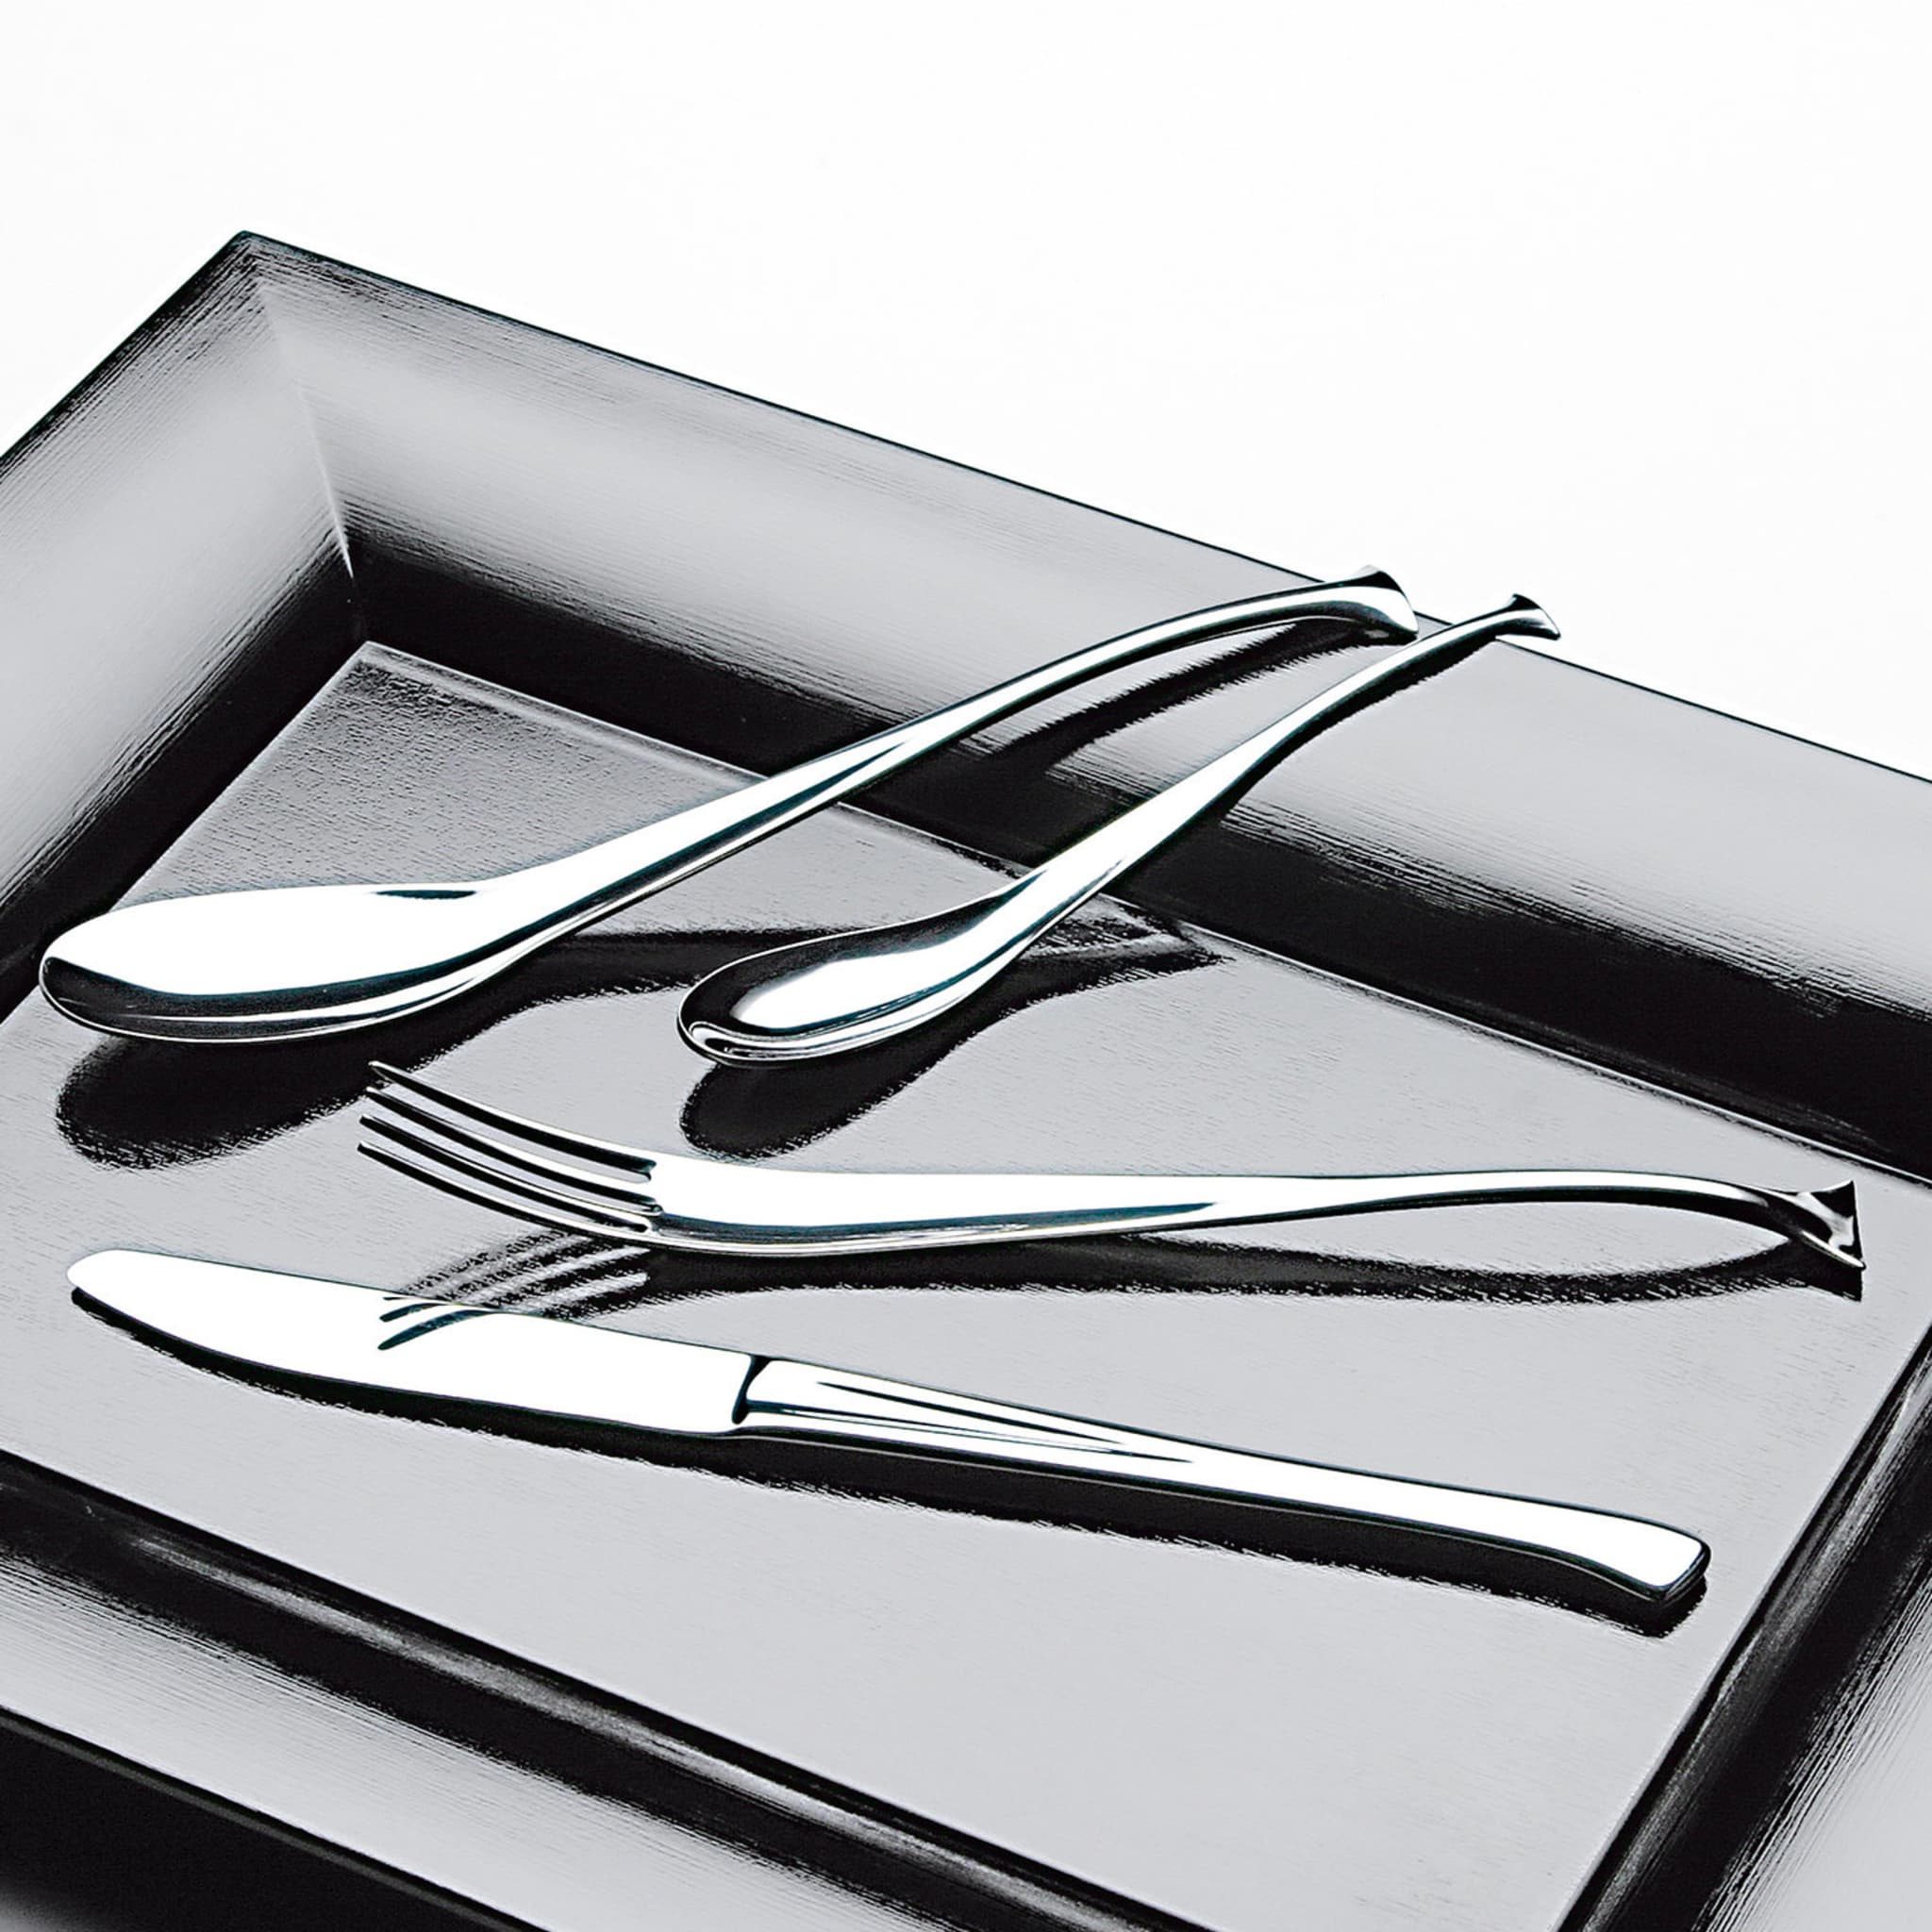 Dolphin 16-Piece Flatware Place Setting - Alternative view 1